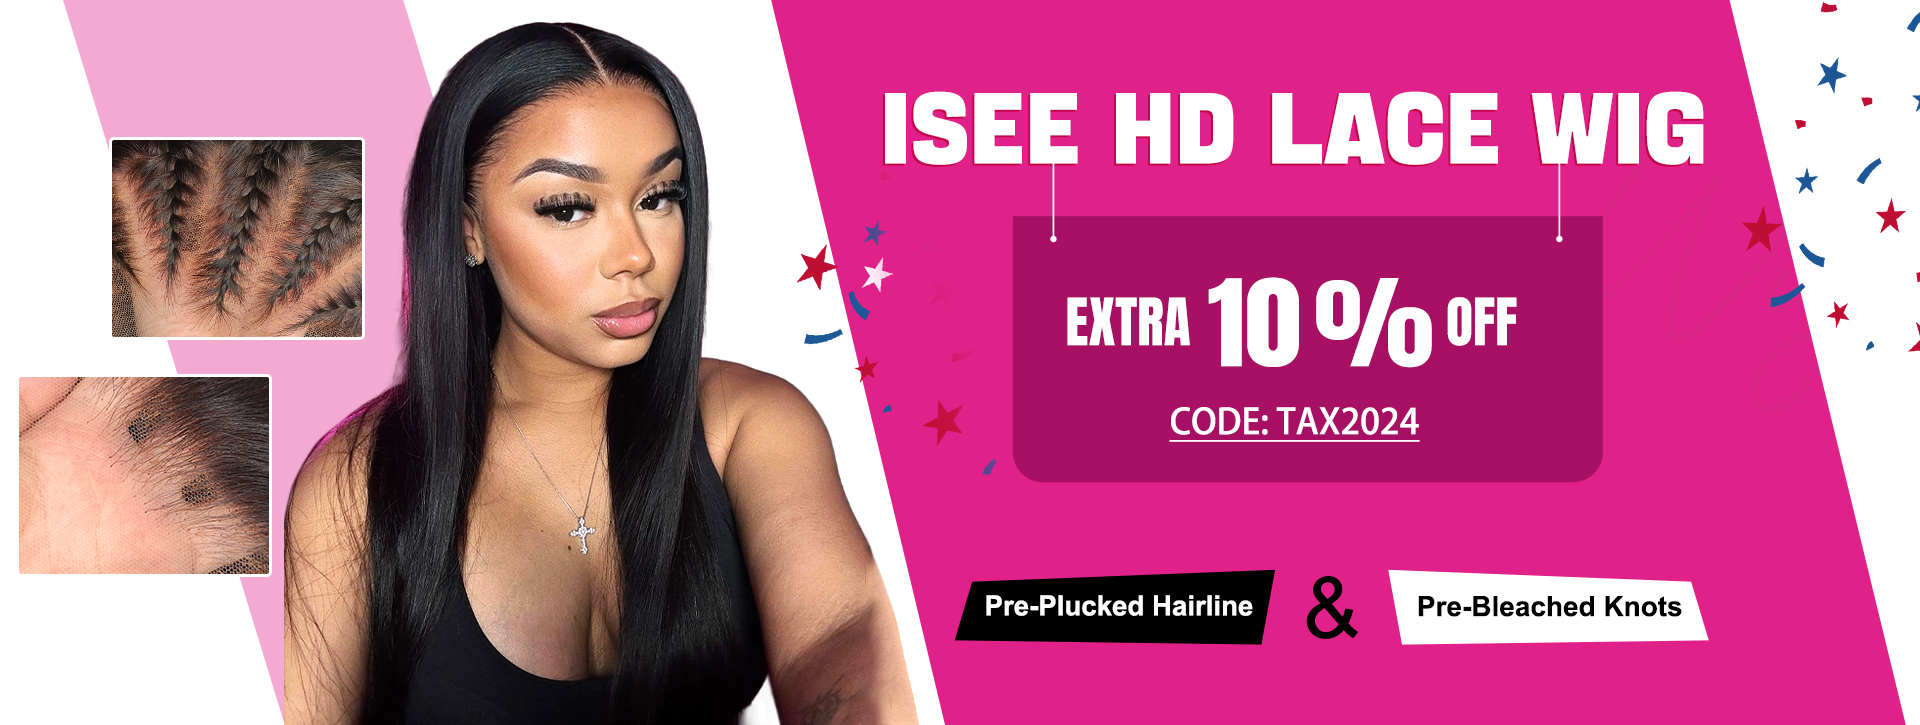 ISEE HD Lace Wig